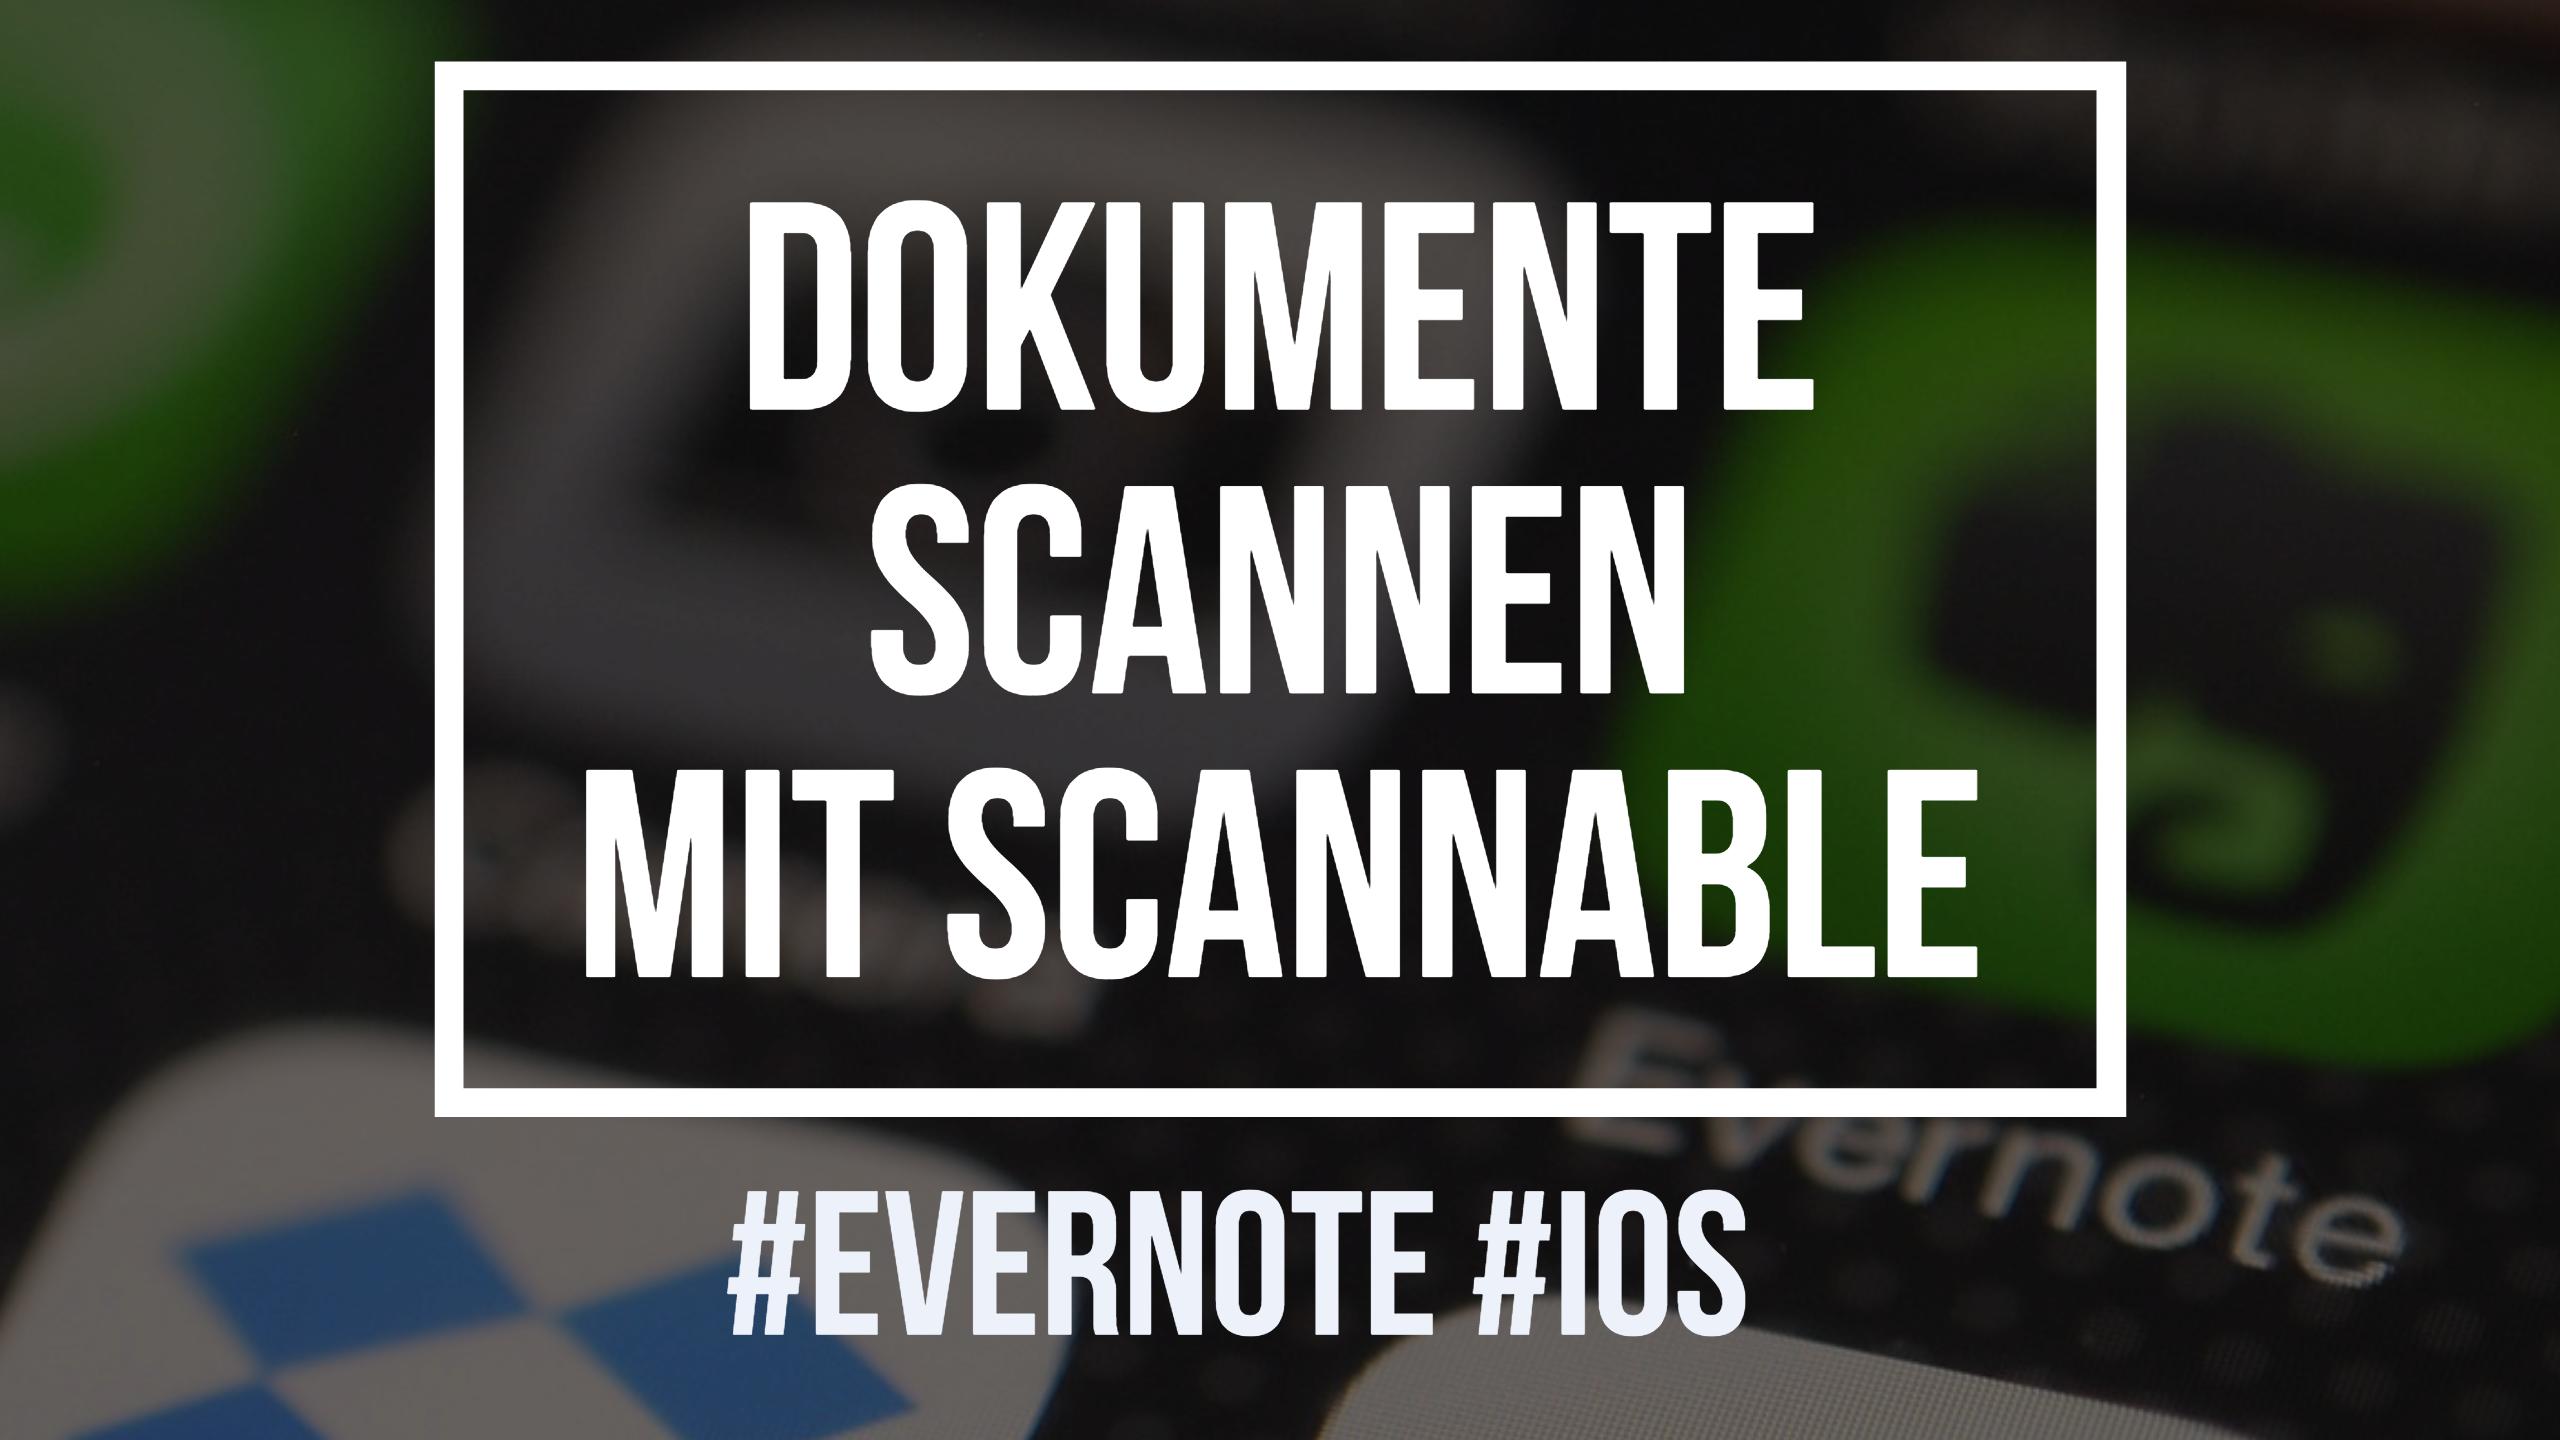 You are currently viewing Tipp: Dokumente scannen mit Scannable #Evernote #iOS